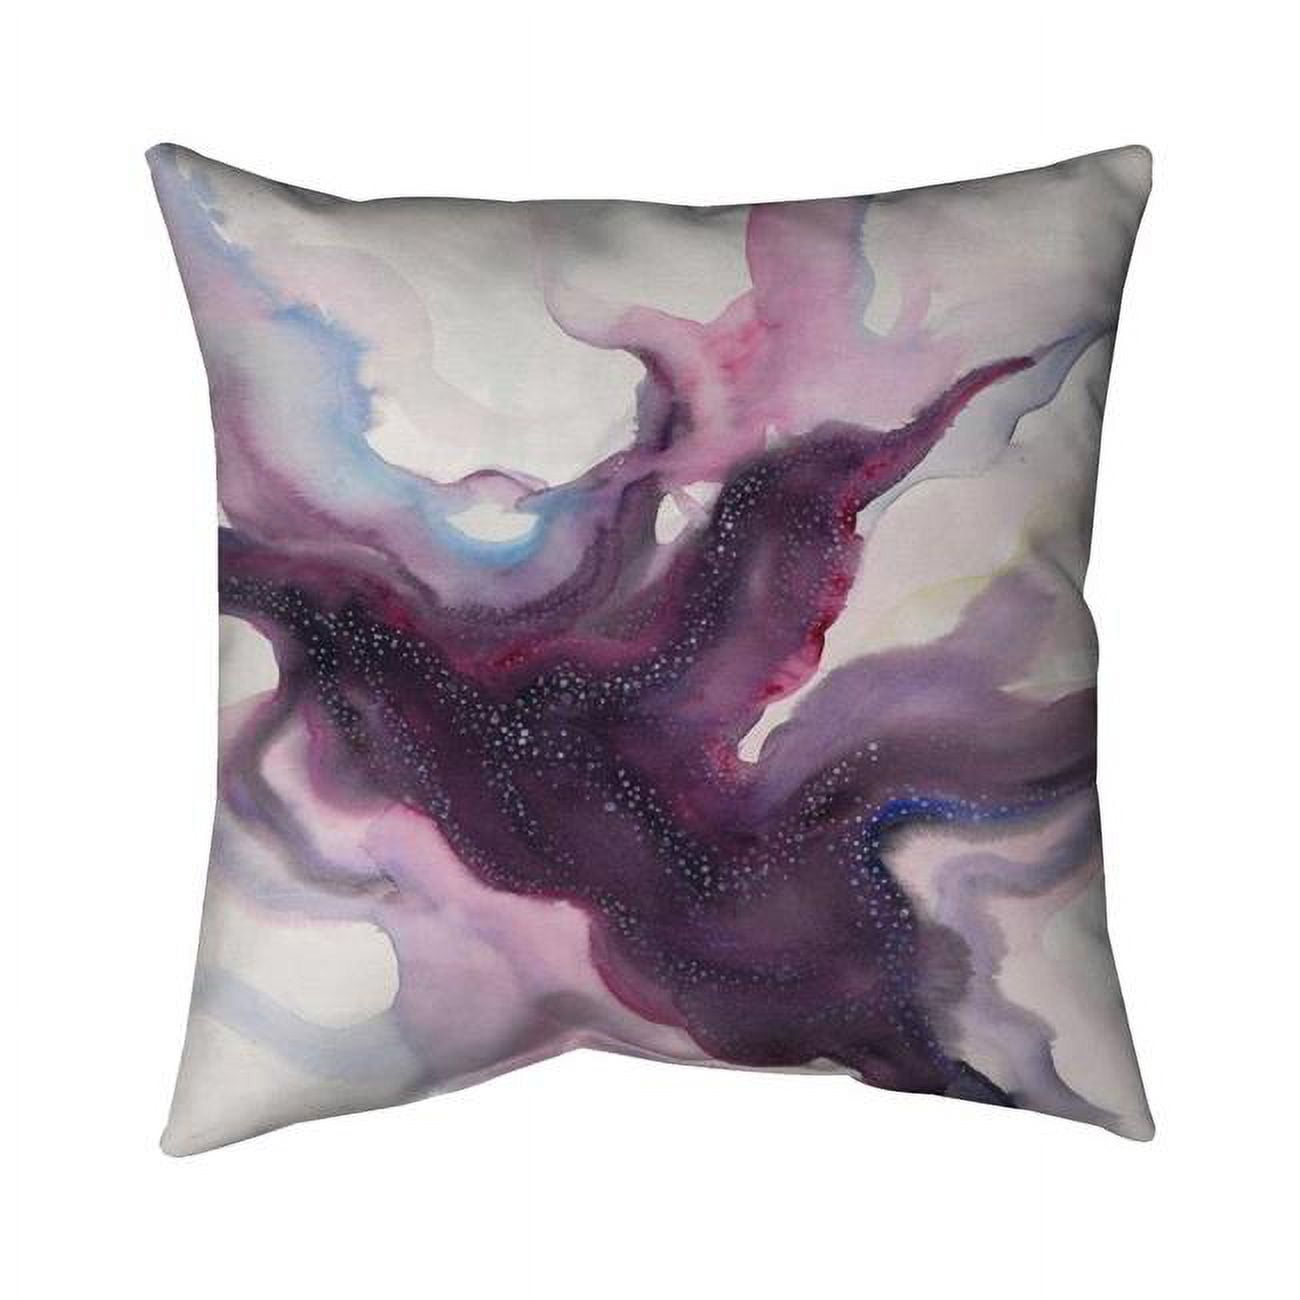 Begin Home Decor 5543-2020-AB86 20 x 20 in. Milky Way-Double Sided Print Indoor Pillow Cover